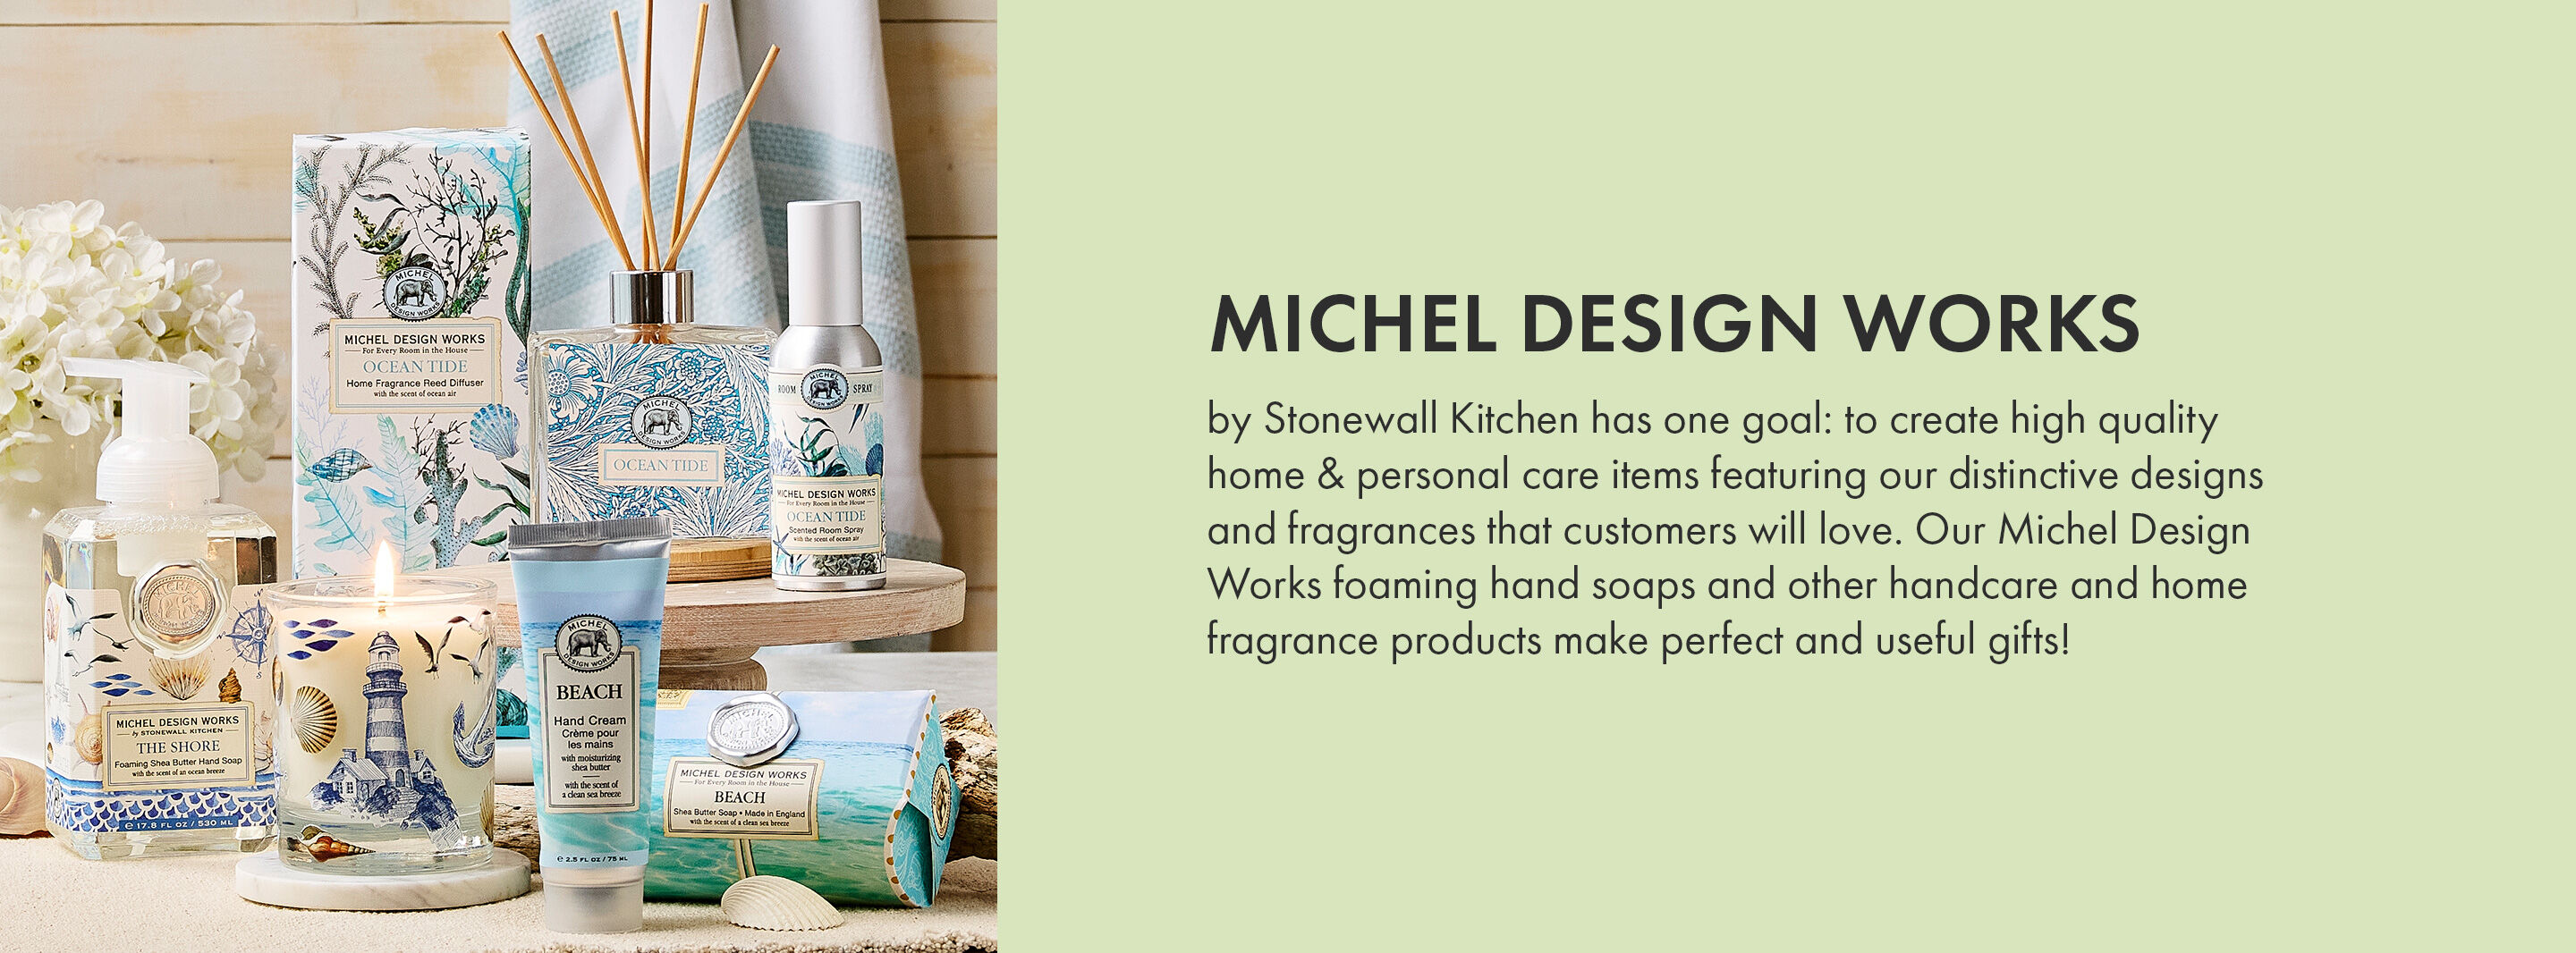 Michel Design Works by Stonewall Kitchen has one goal: to create high quality home & personal care items featuring our distinctive designs and fragrances that customers will love. Our Michel Design Works foaming hand soaps and other handcare and home fragrance products make perfect and useful gifts!